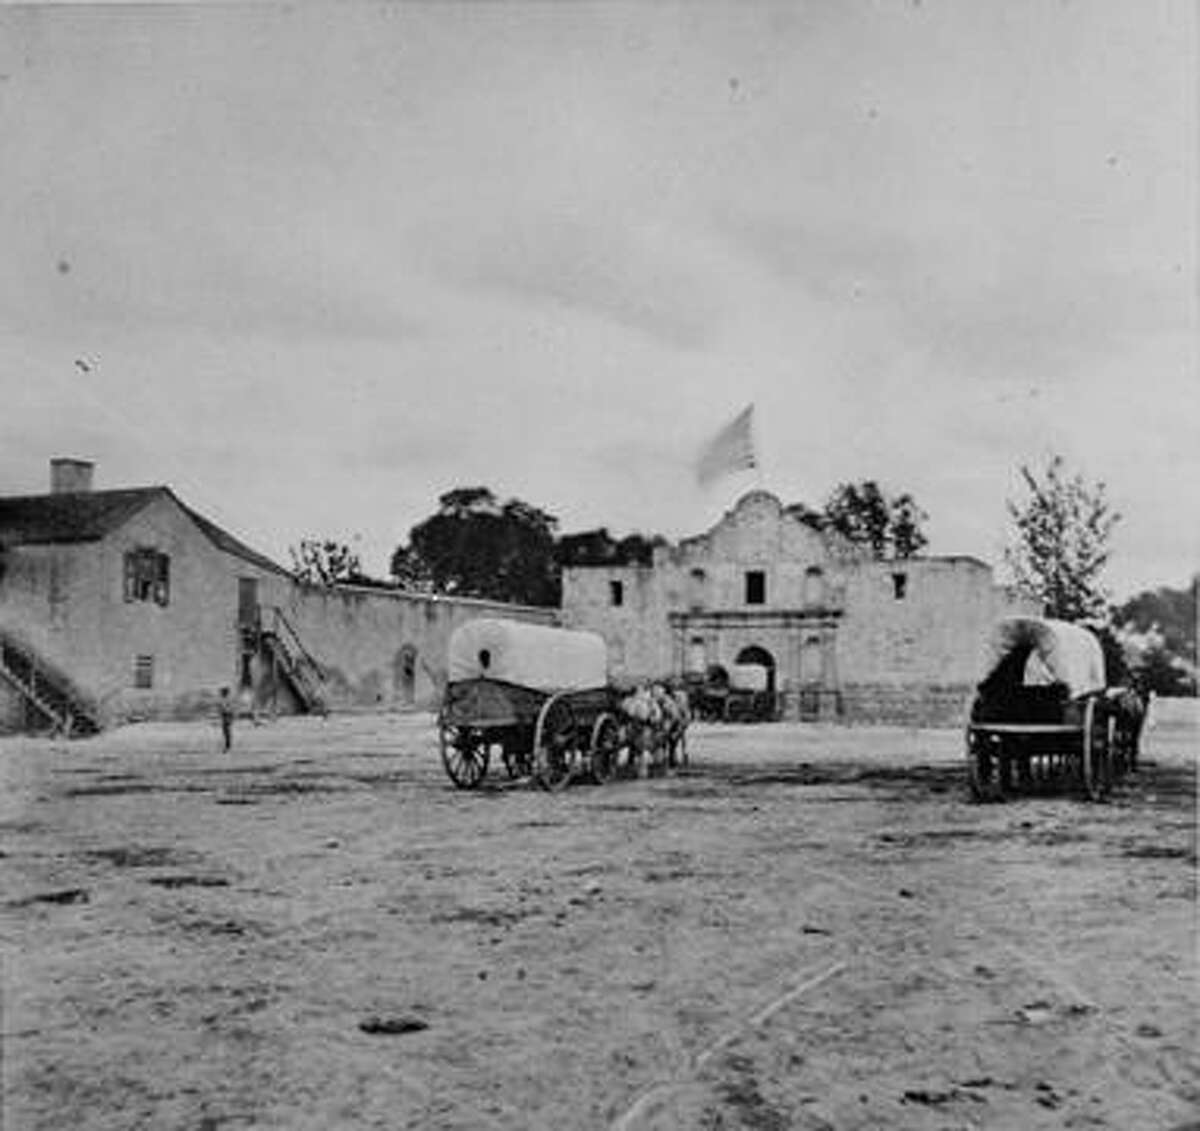 Just like it is for San Antonio Express-News employees today, the Alamo was a familiar sight to Express workers in the latter half of the 1860s. Parking on its grounds now is prohibited, however.